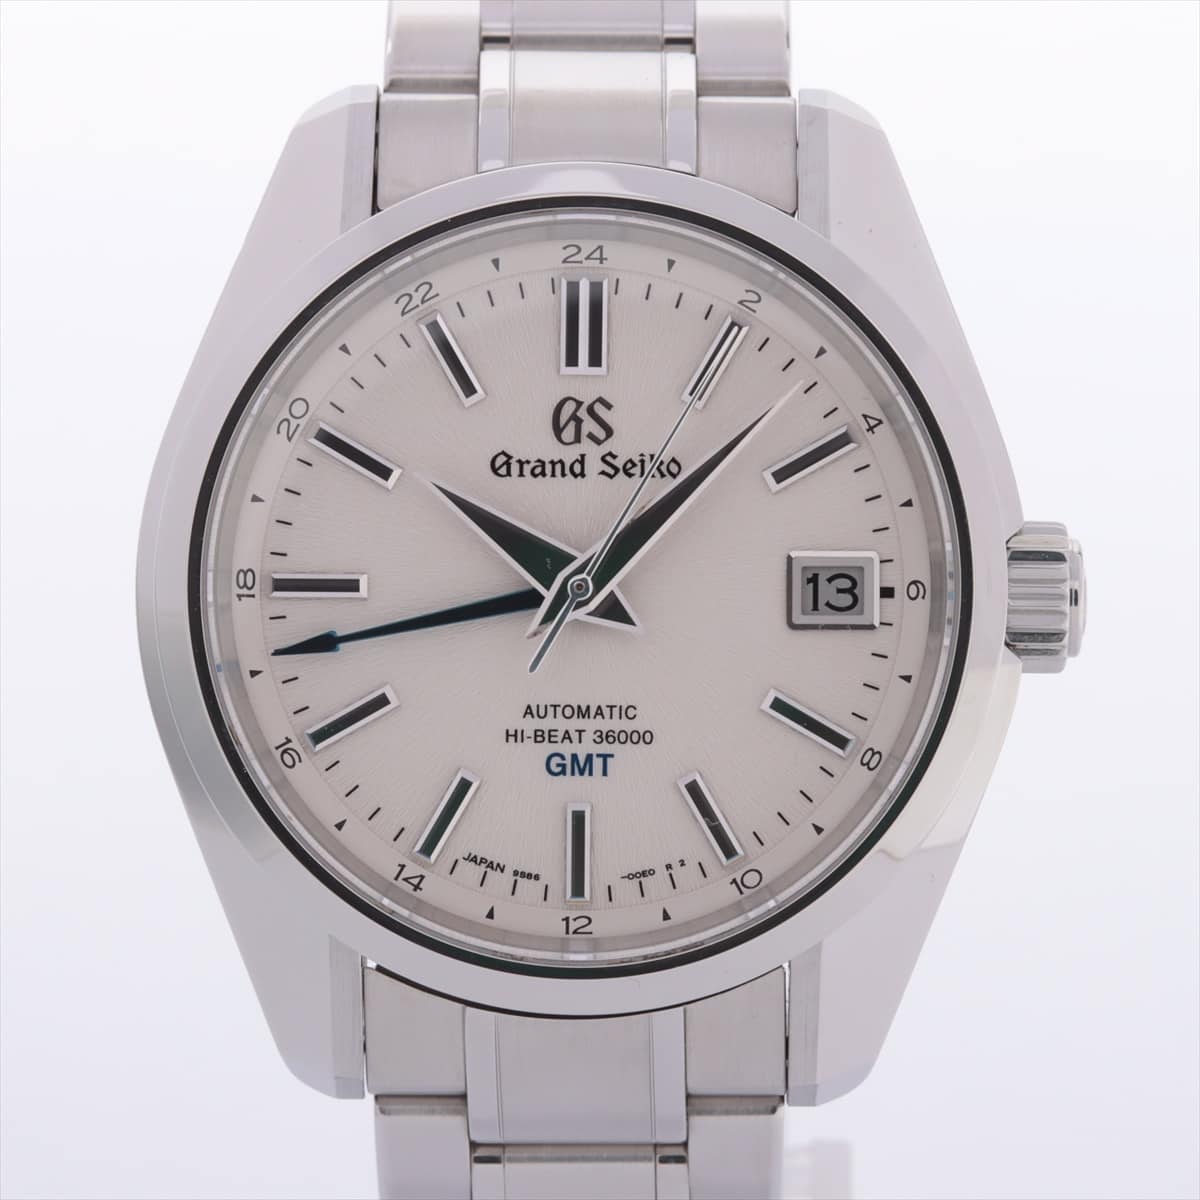 Grand Seiko Grand Seiko Mechanical Hi-Beat 36000 GMT SBGJ201 SS & externally manufactured leather AT Silver-Face Extra-Link3